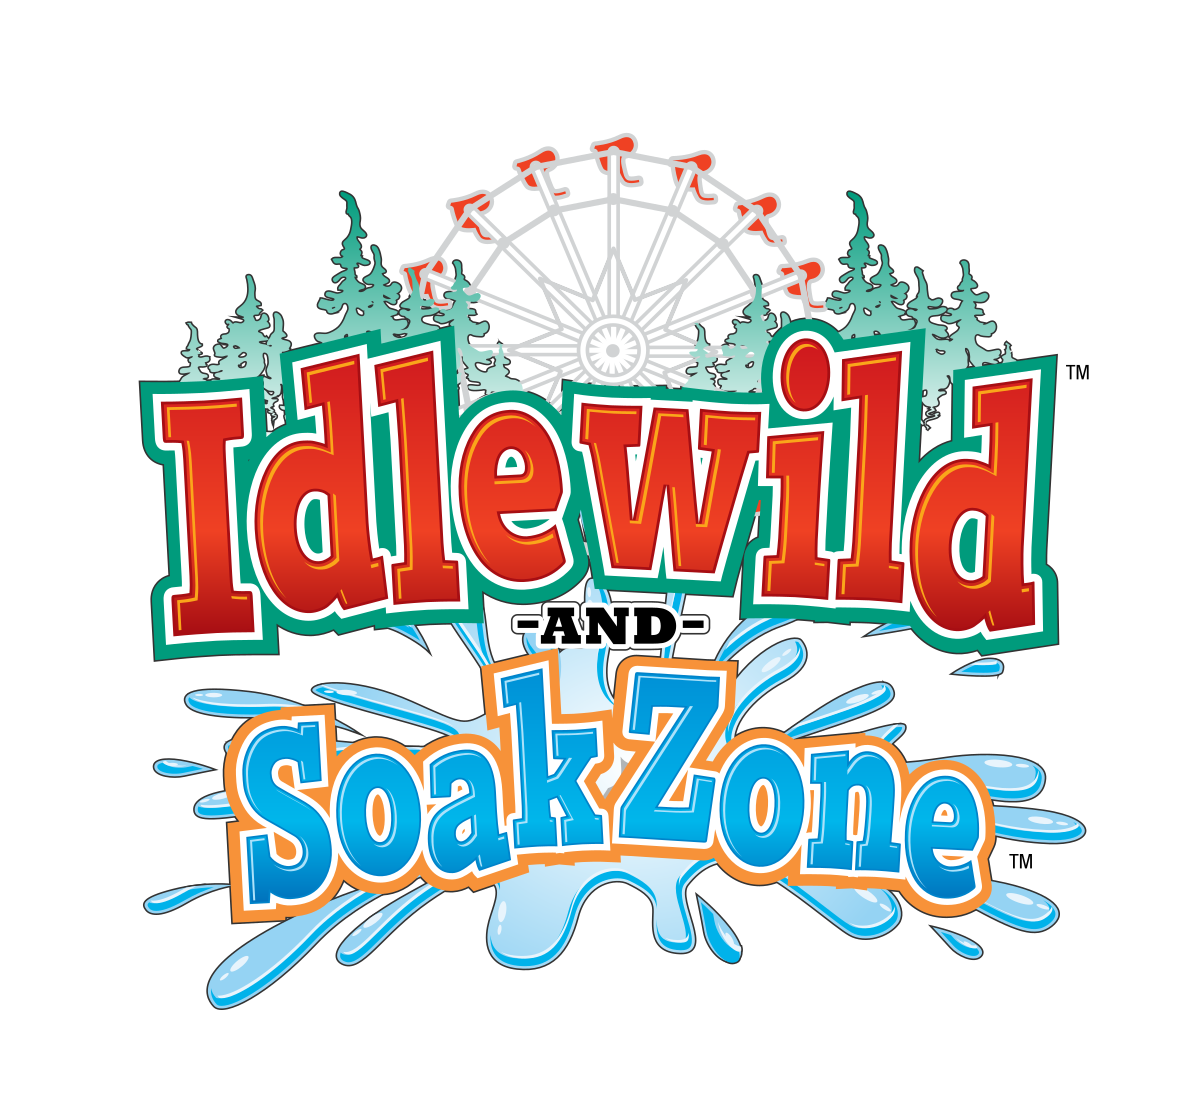 Idlewild and SoakZone - A Great Outing from Pittsburgh for Kids